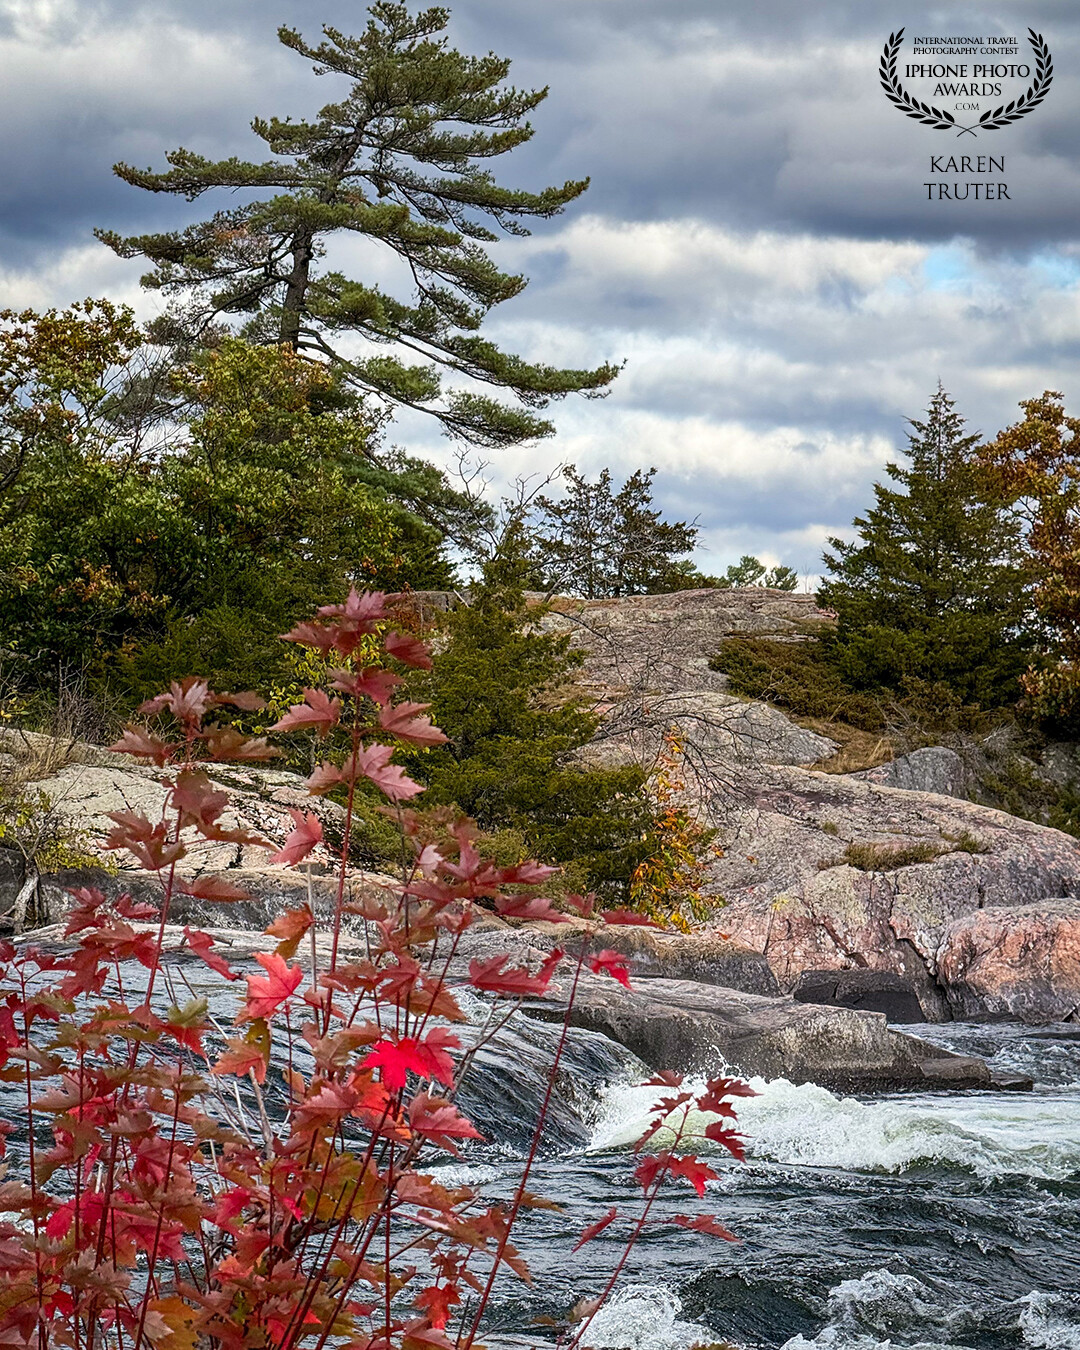 The rushing waters and rock face of the Canadian Shield at Burleigh Falls are the quintessential back drop for the paintings of the Group Of Seven. Adding to this, the colours of Fall completes the magnificence.